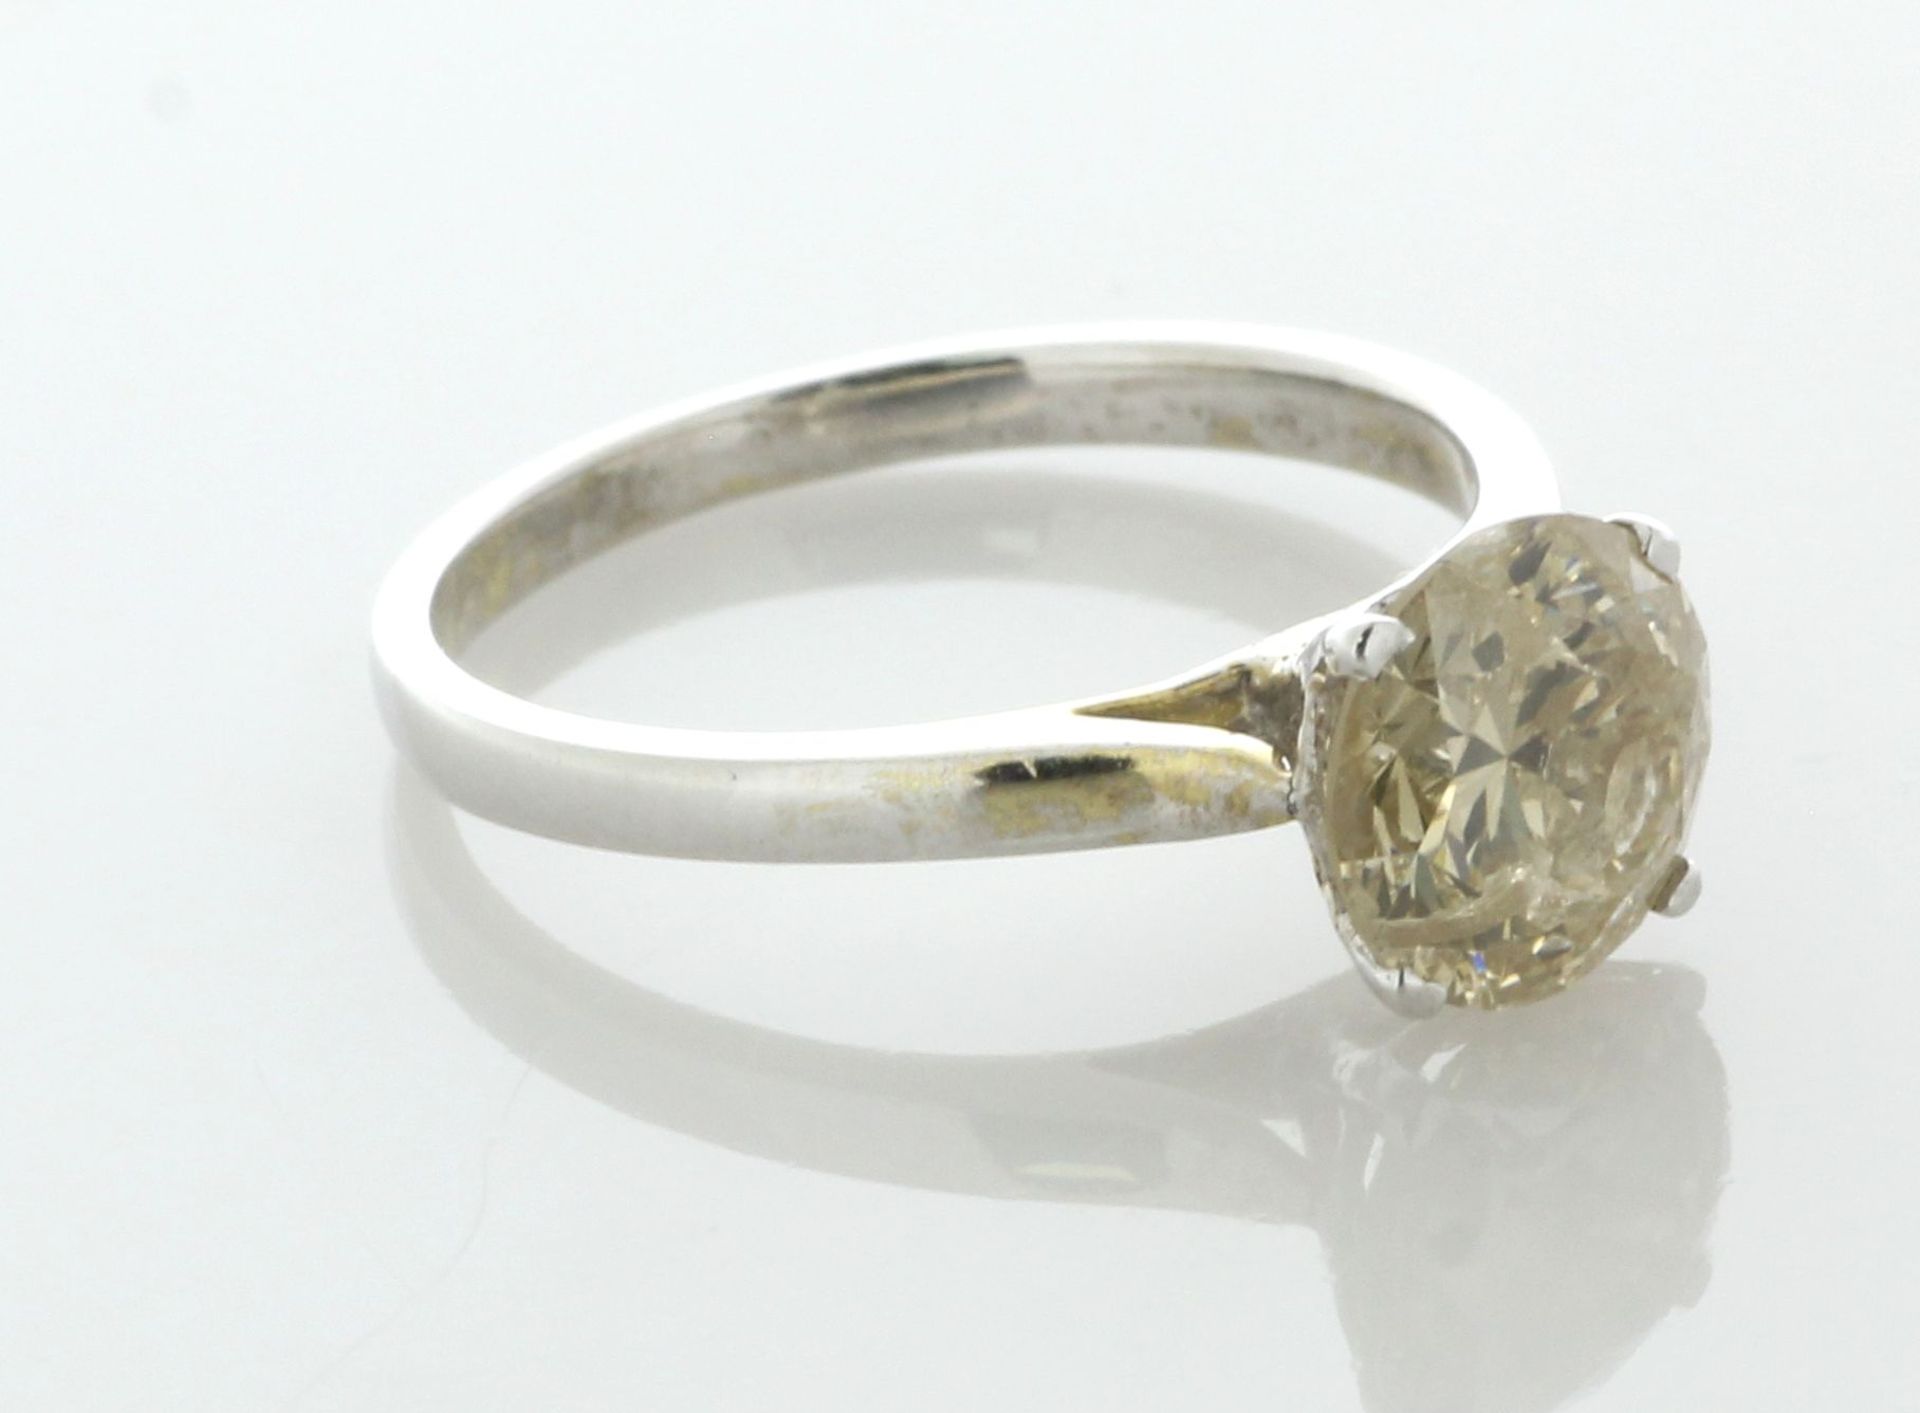 18ct White Gold Single Stone Diamond Ring 1.78 Carats - Valued By AGI £7,200.00 - One natural - Image 2 of 4